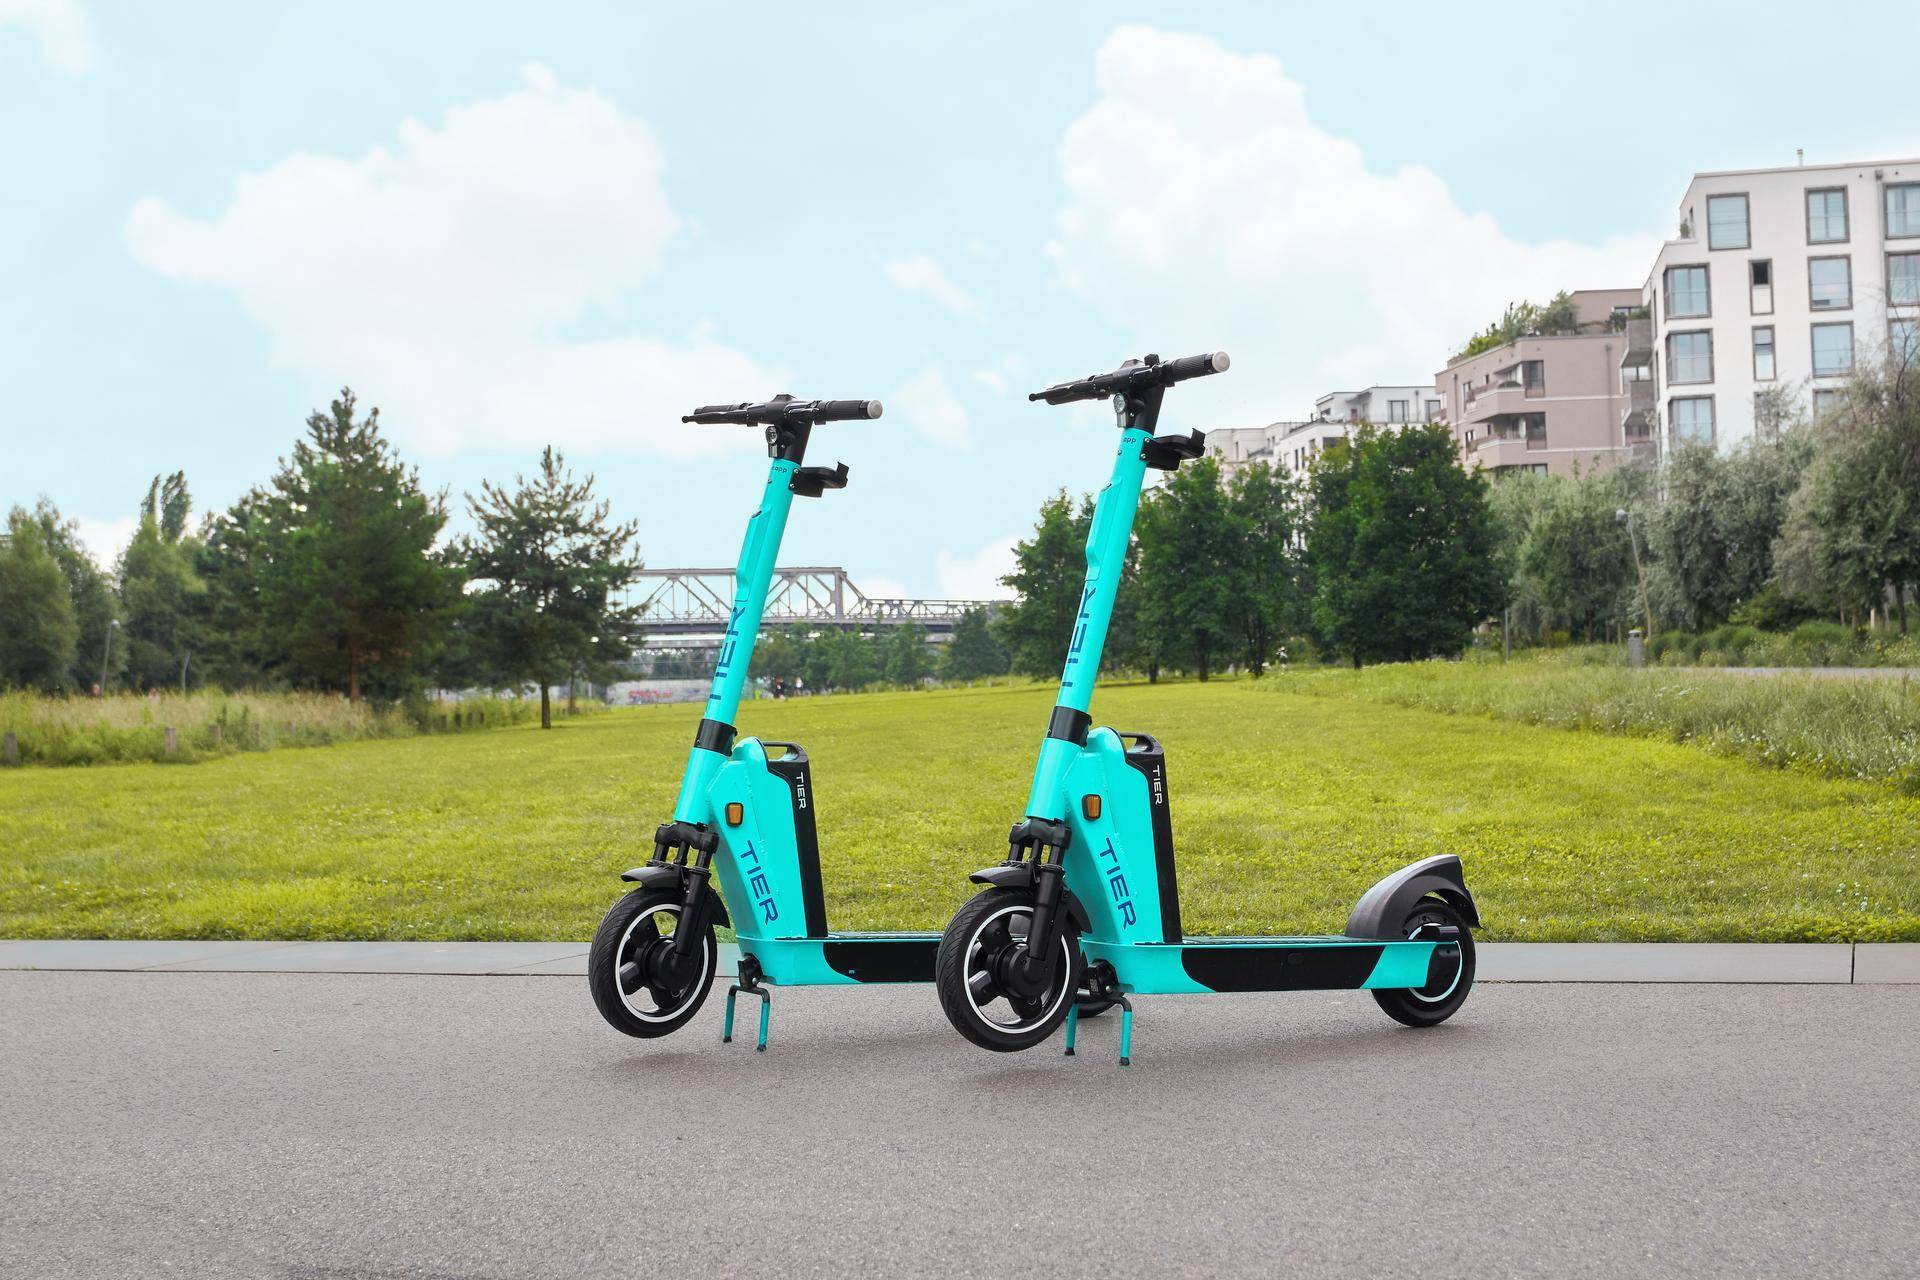 A photo of two Tier E-Scooters near a green field.